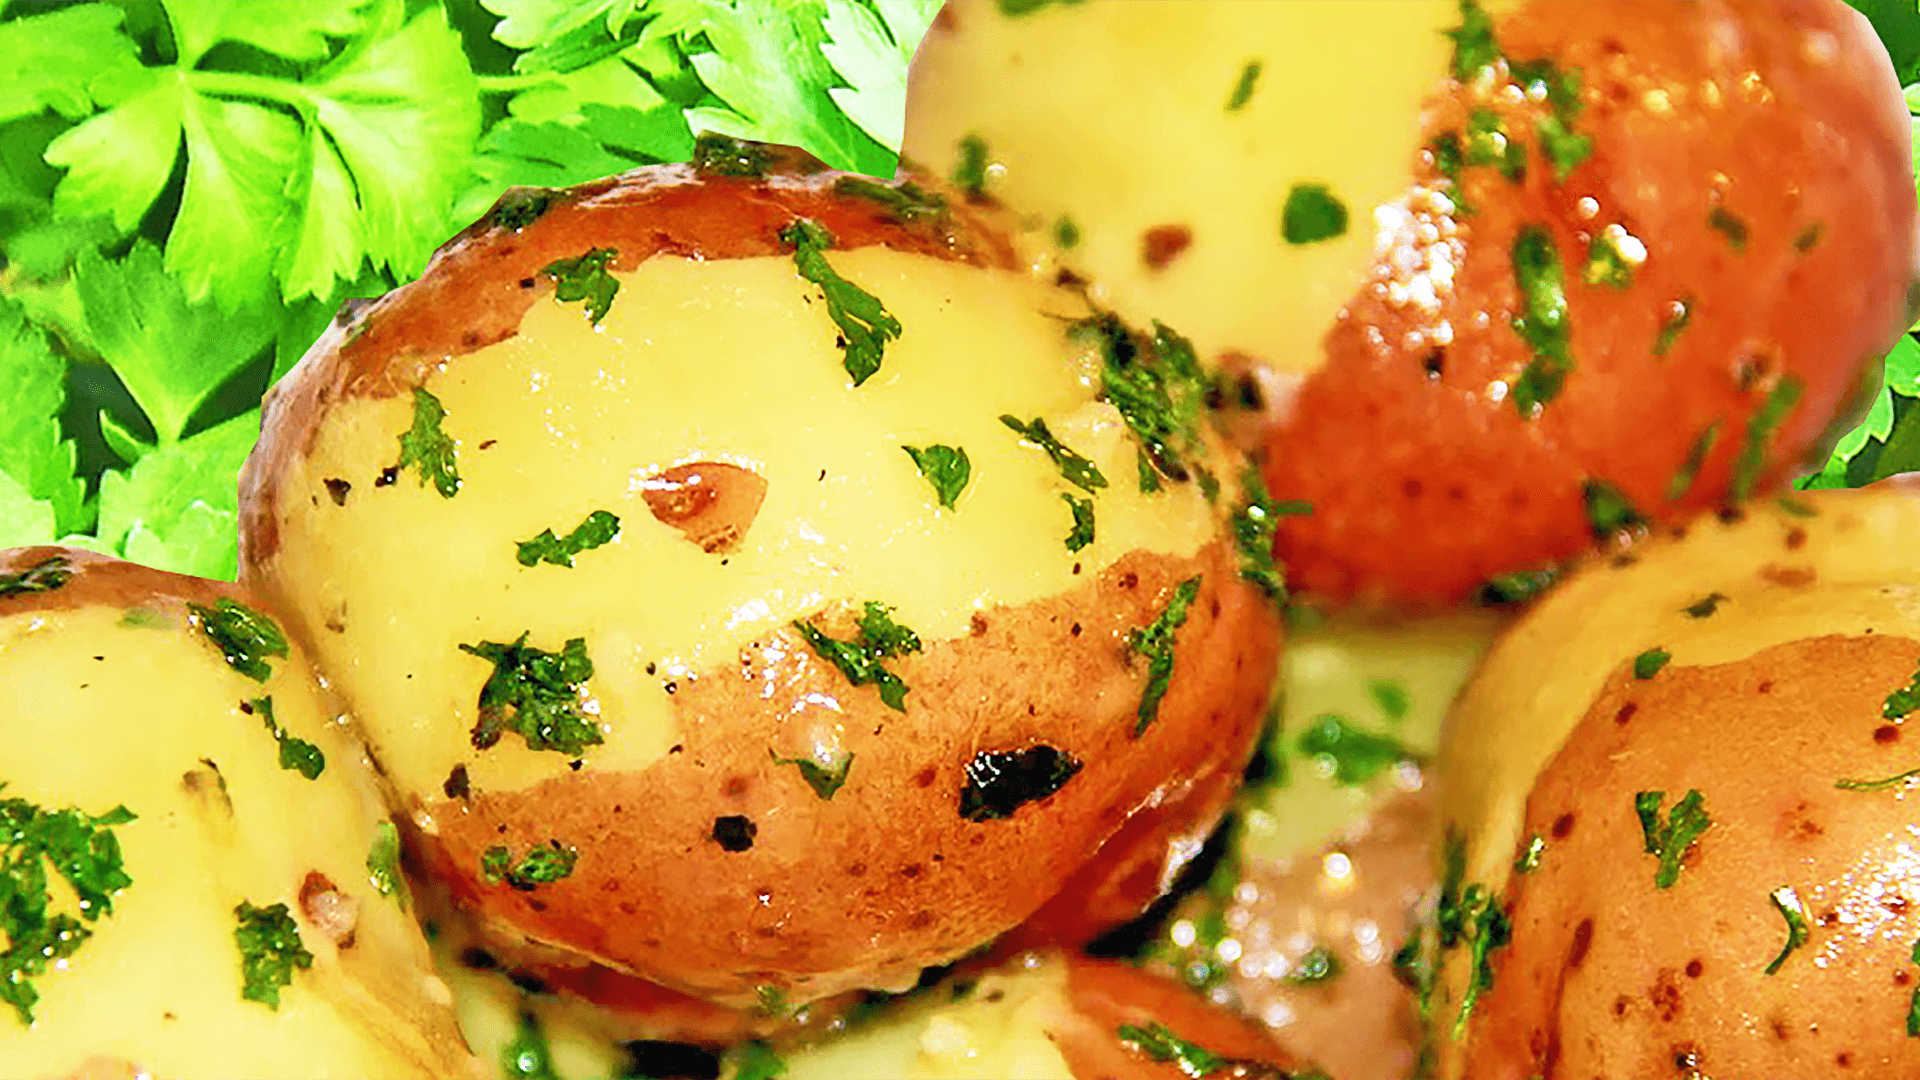 Boiled Potatoes Recipe with Butter and Fresh Greenery